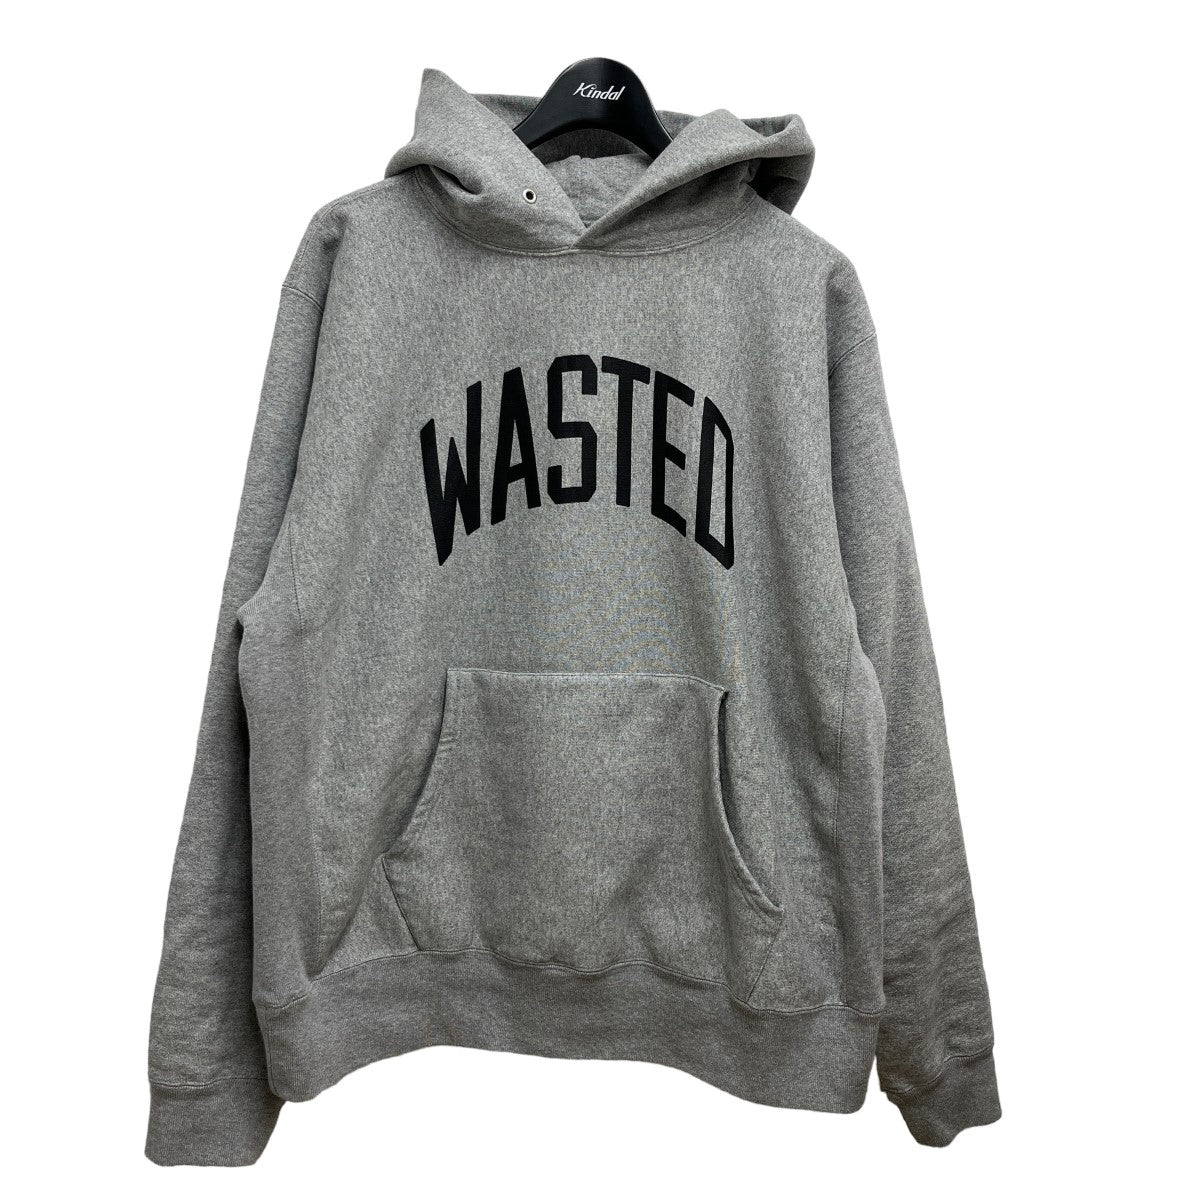 Wasted Youth HEAVY WEIGHT HOODIE L 黒ゴッドセレクション